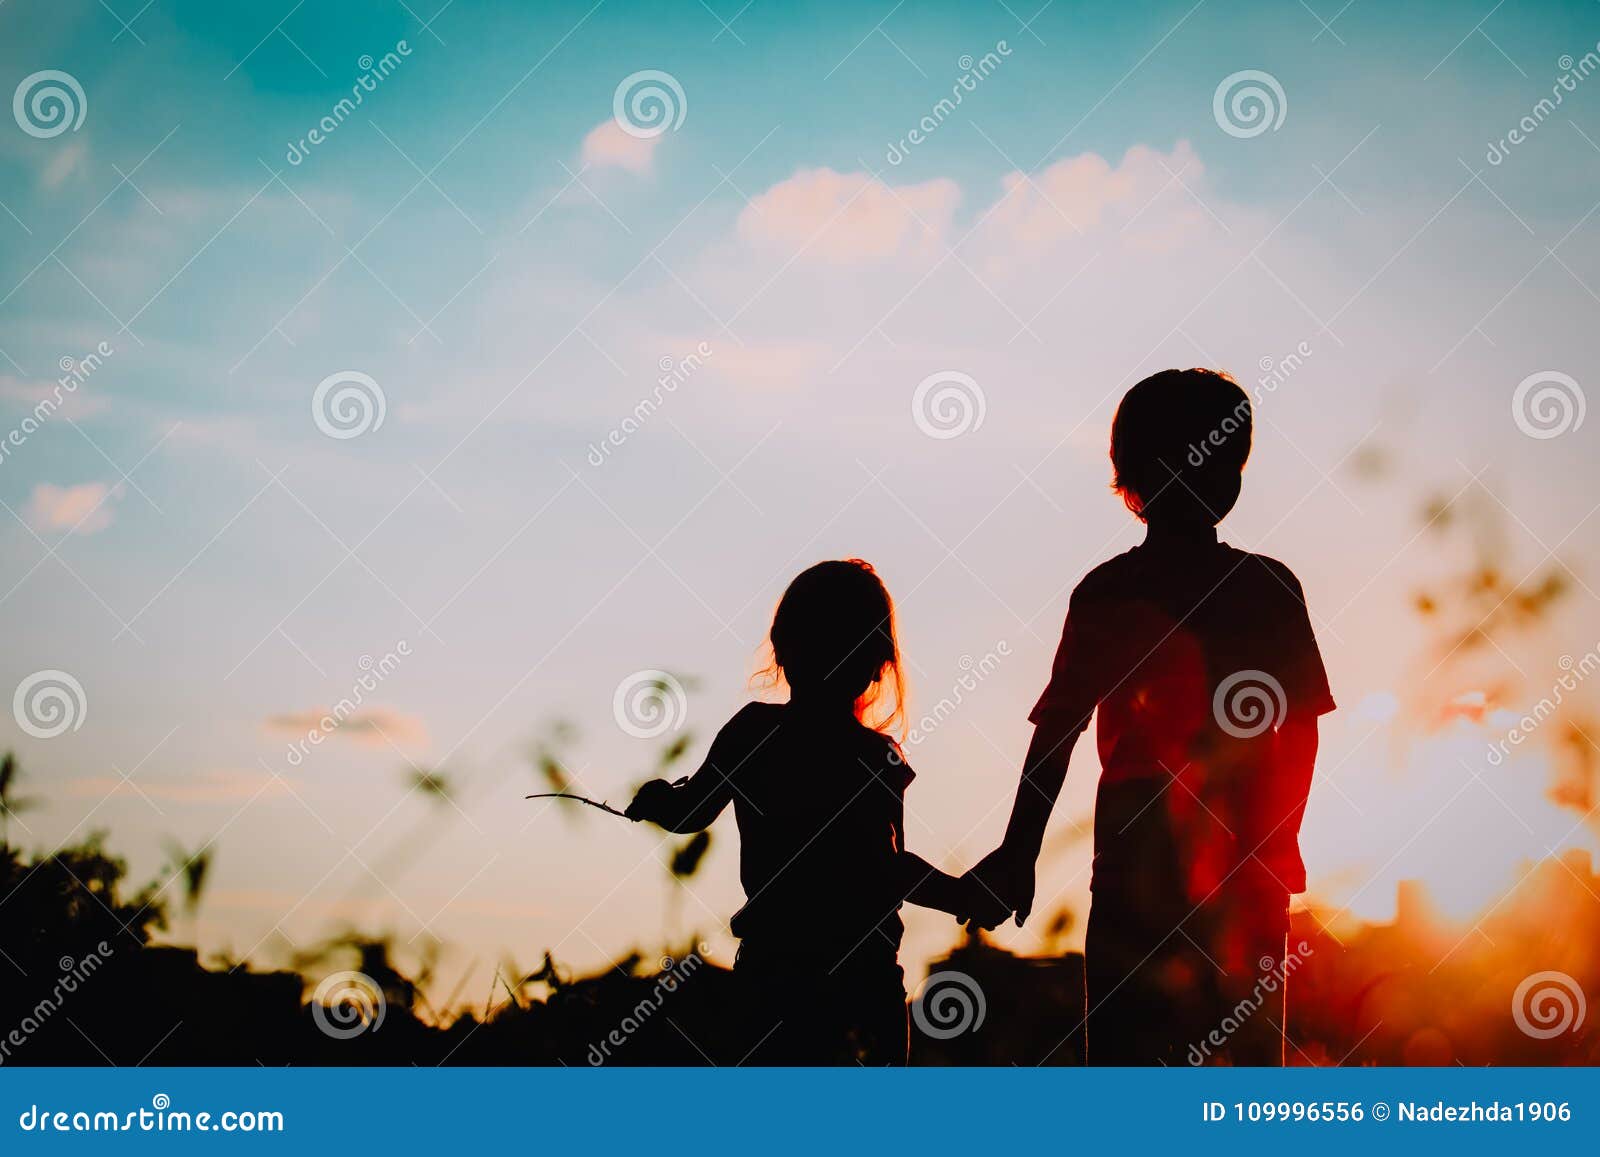 Little Boy and Girl Silhouettes Holding Hands at Sunset Stock ...